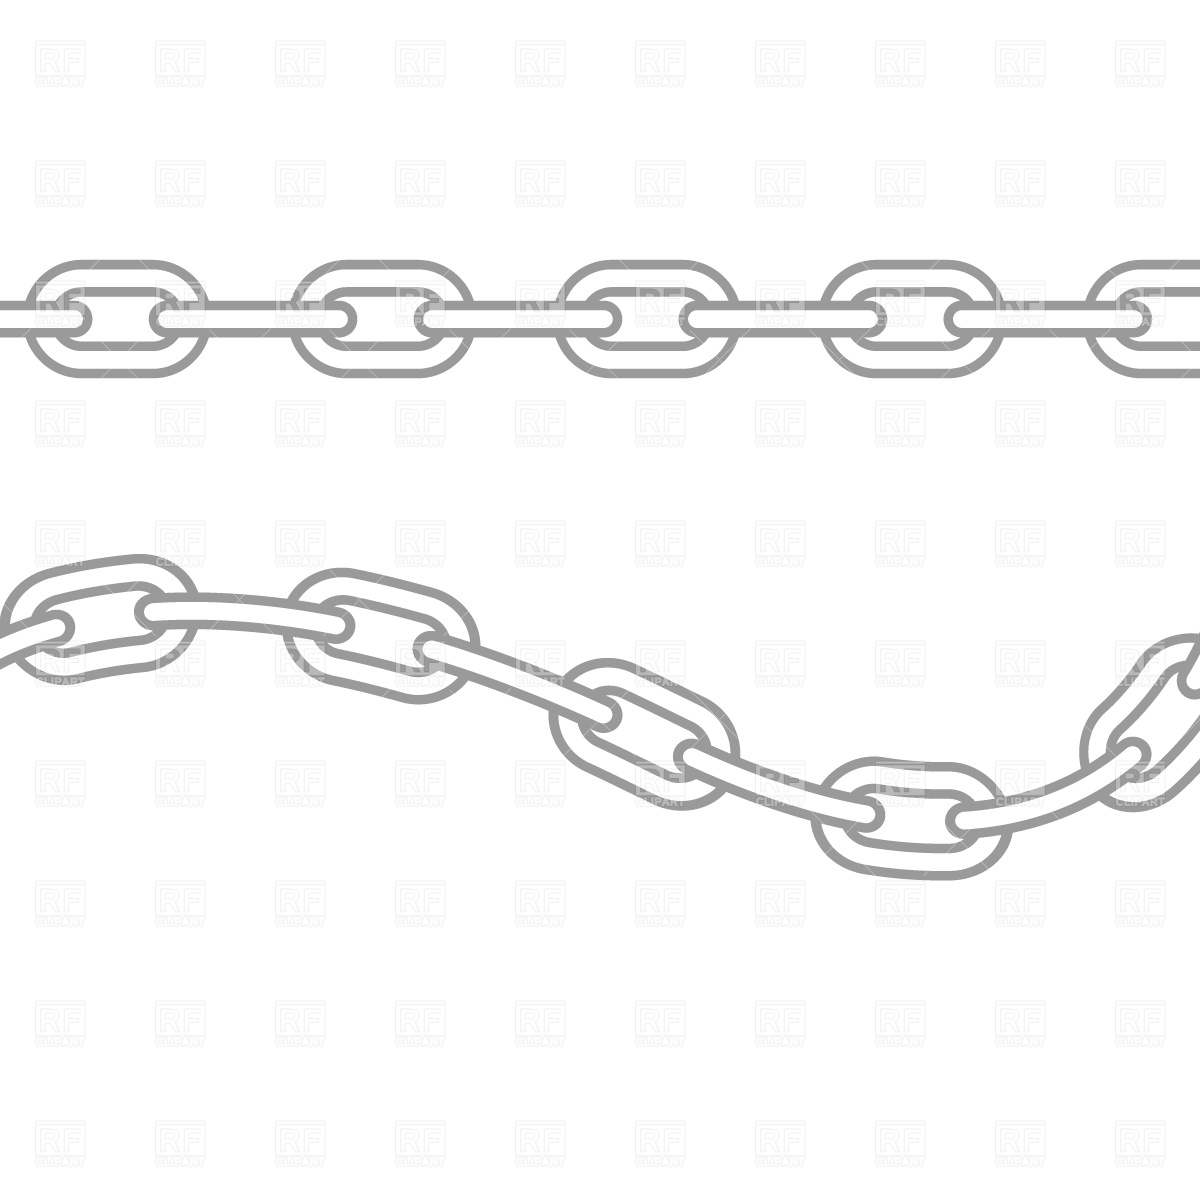 Chain Links 706 Design Elements Download Royalty Free Vector Clip